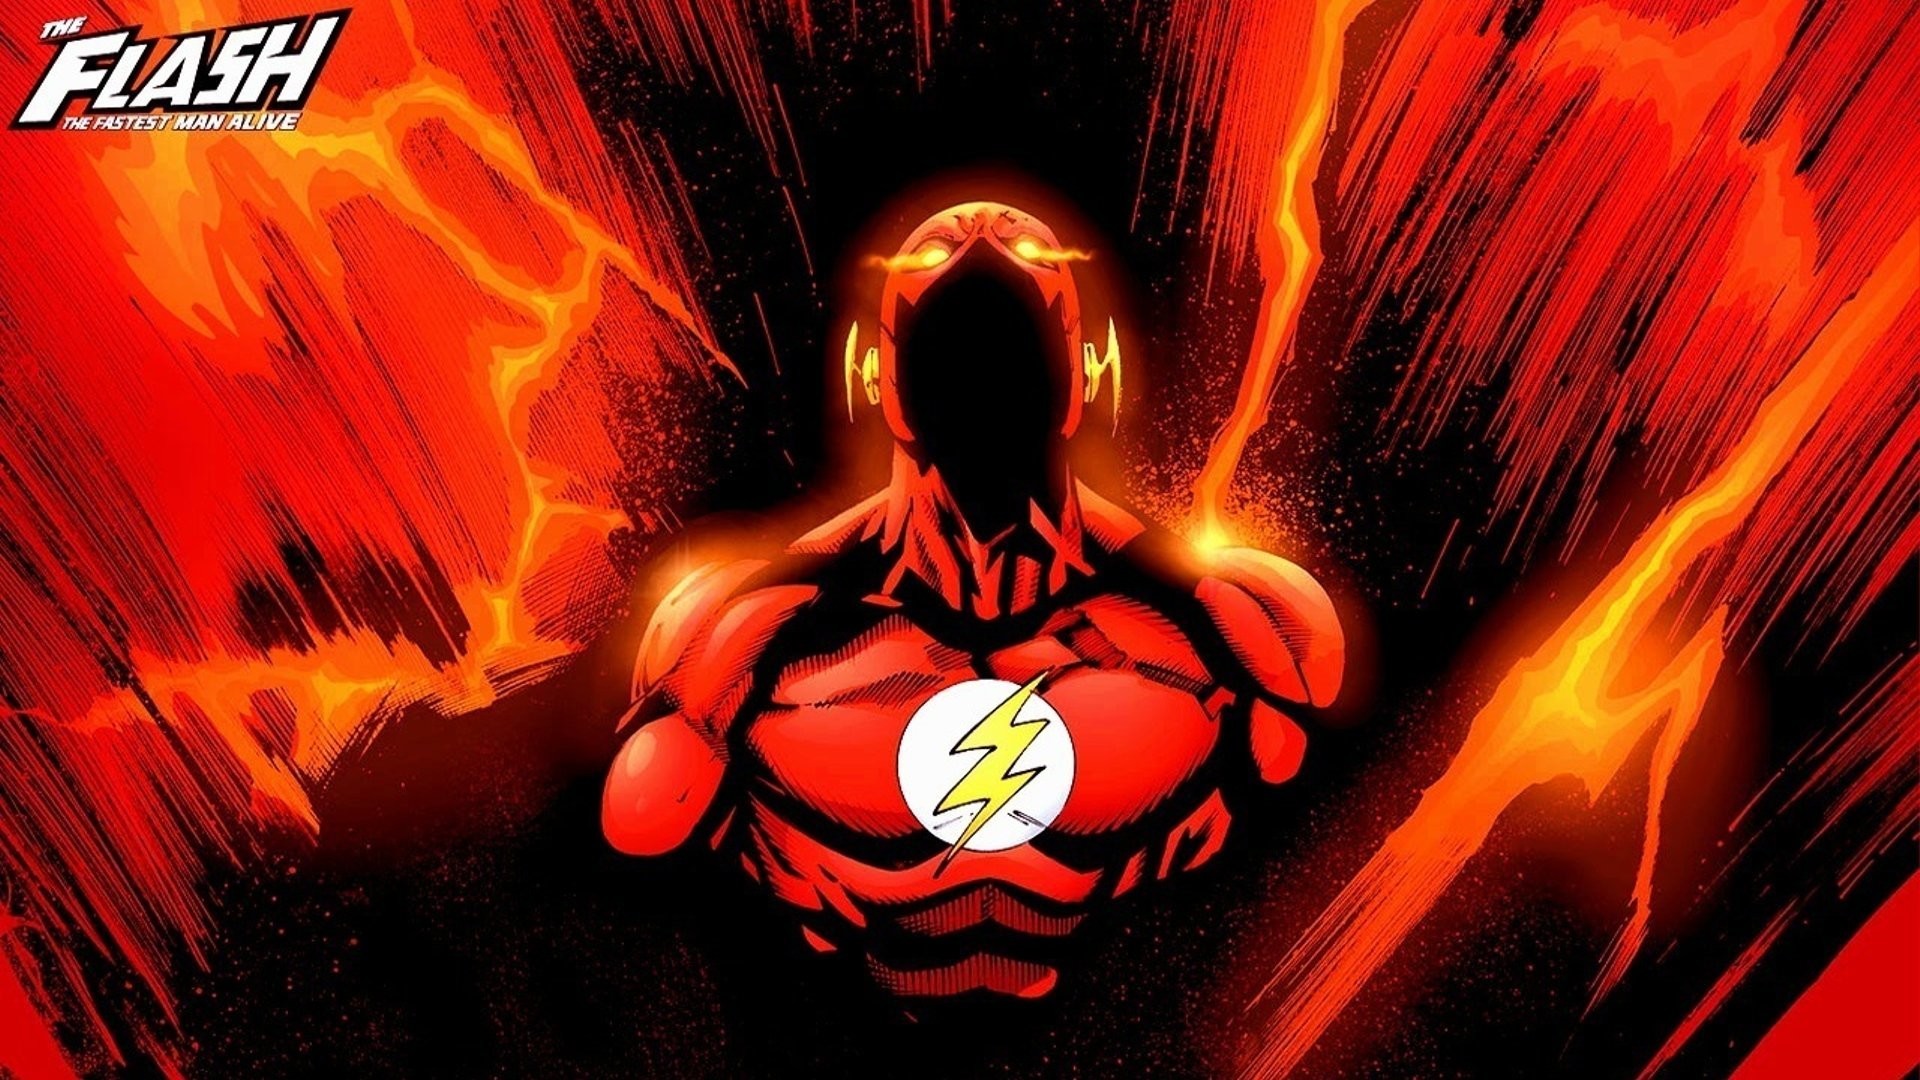 1920x1080  Barry Allen the Flash wallpapers HD free Download | HD Wallpapers  | Pinterest | Flash